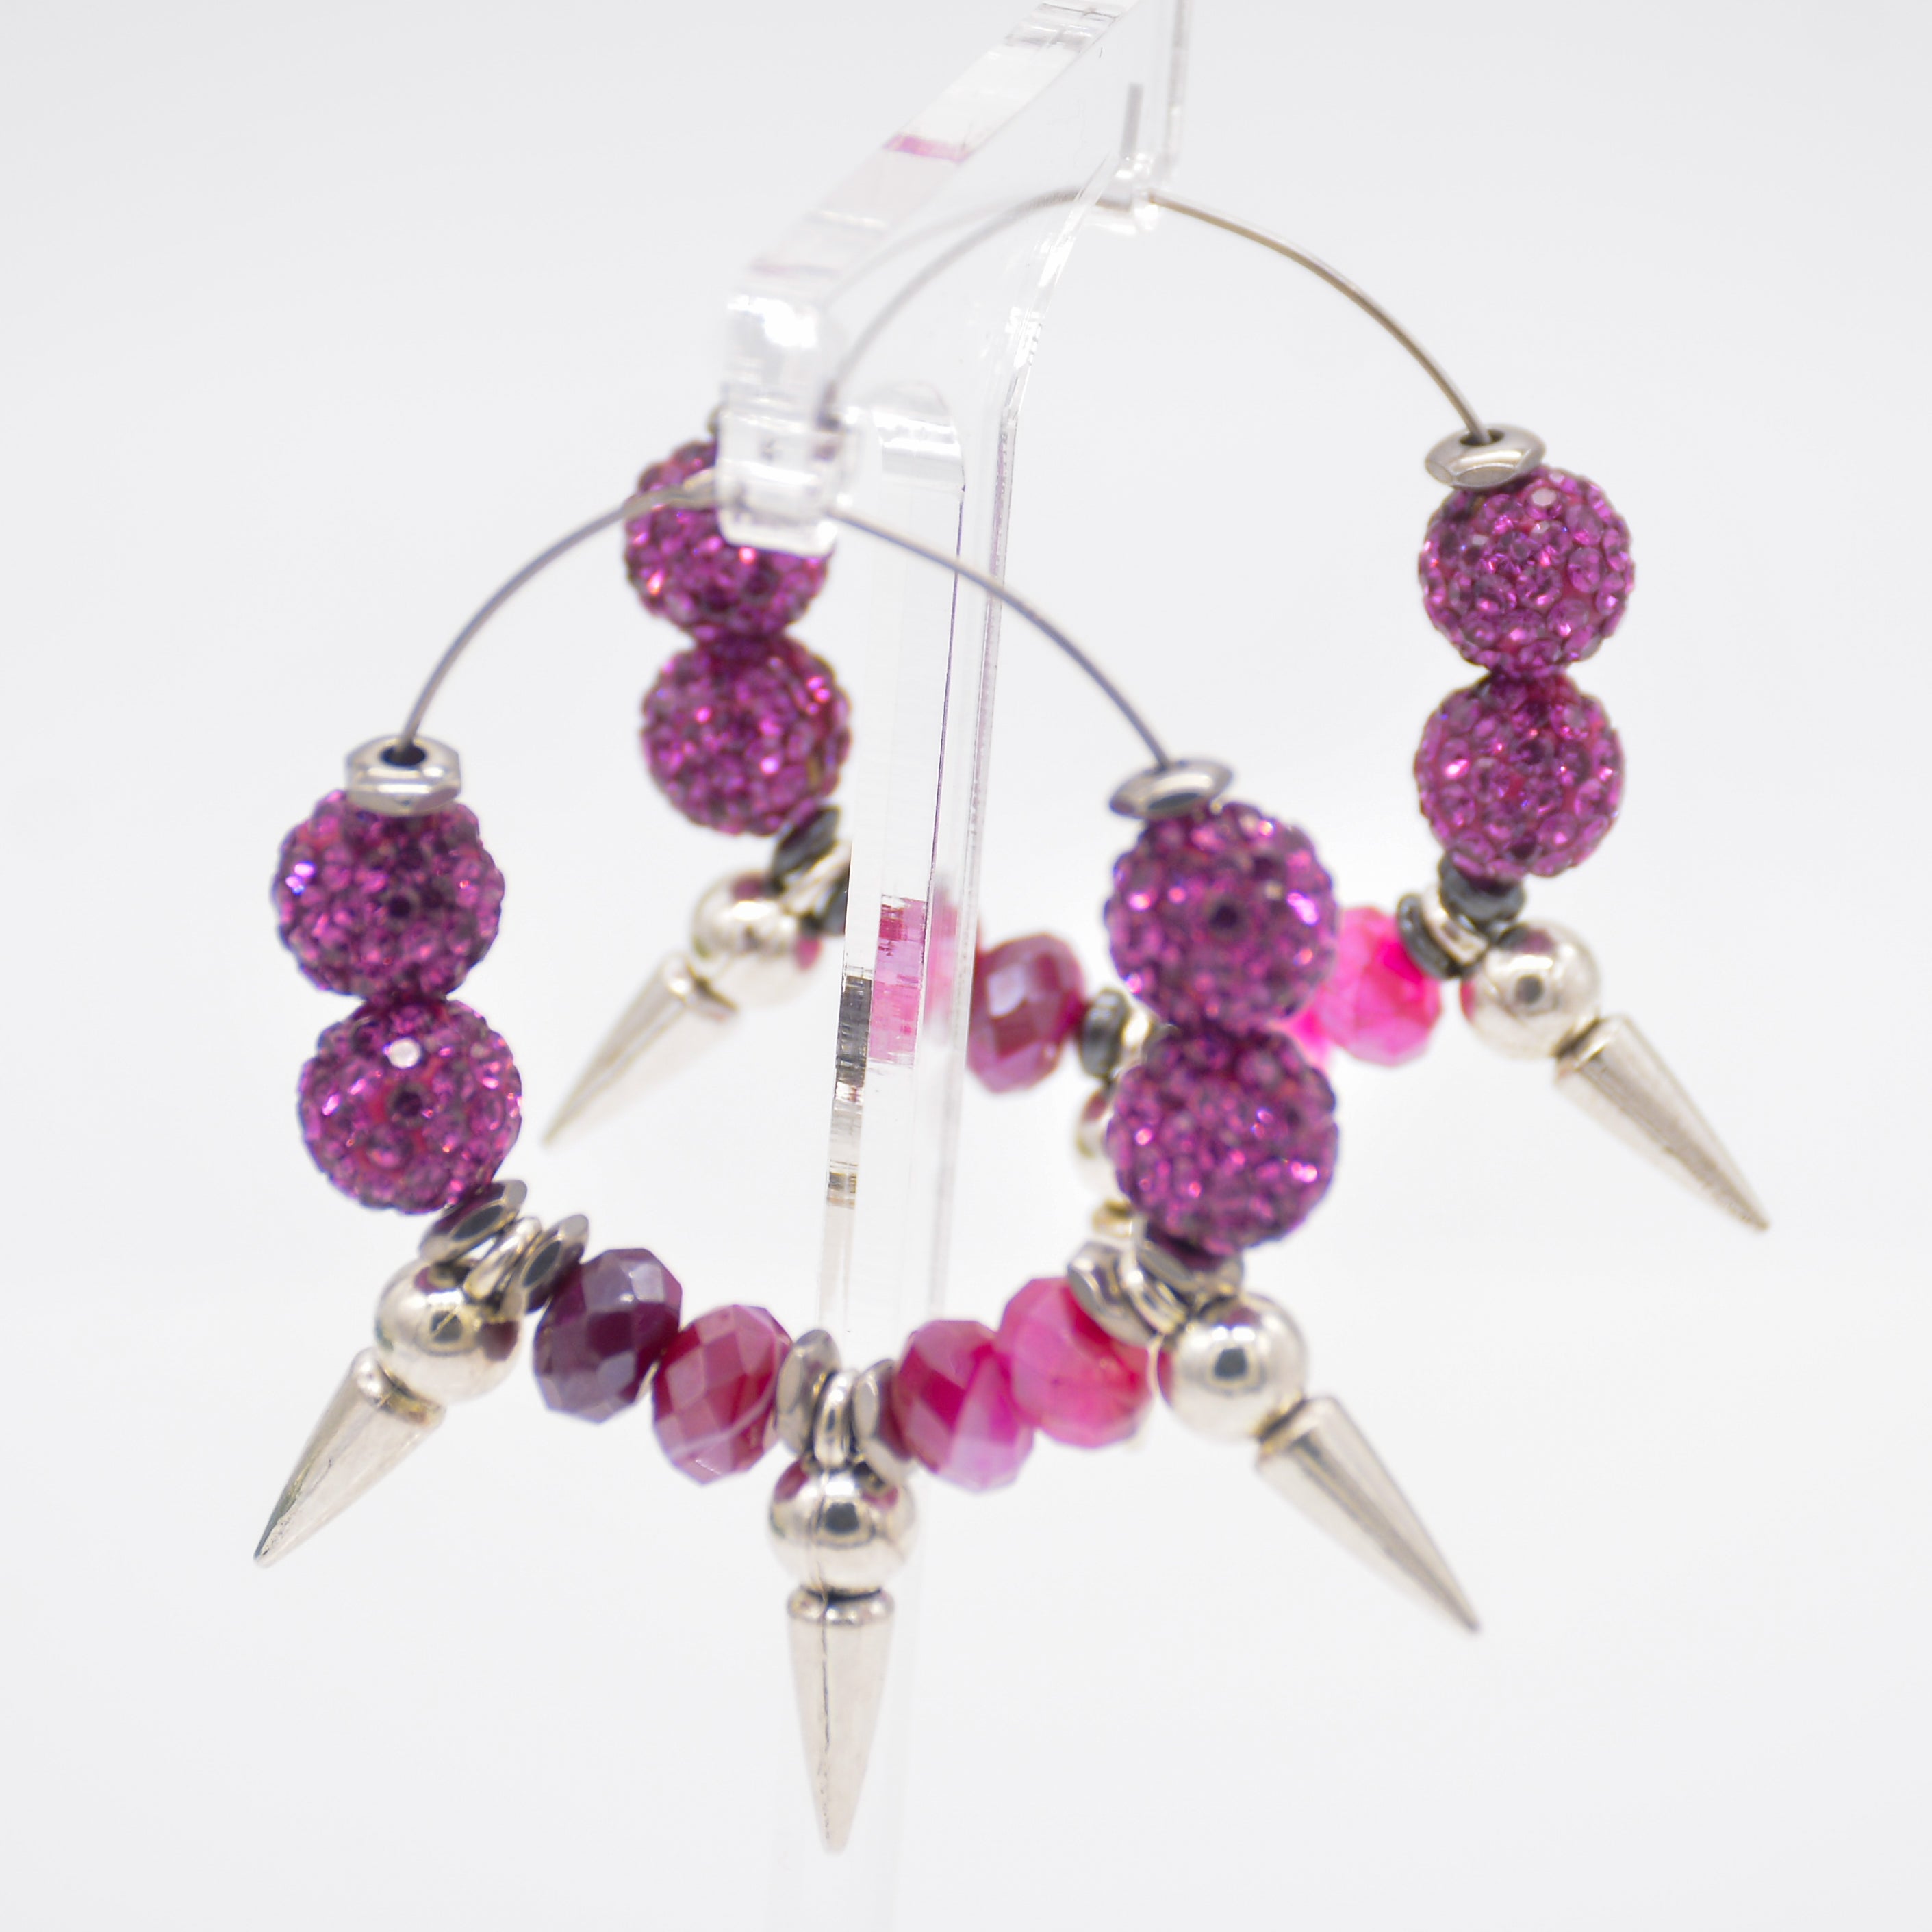 Phoenix's Radiance Pink Agate Earrings with Fuchsia Shamballa & Silver Spikes